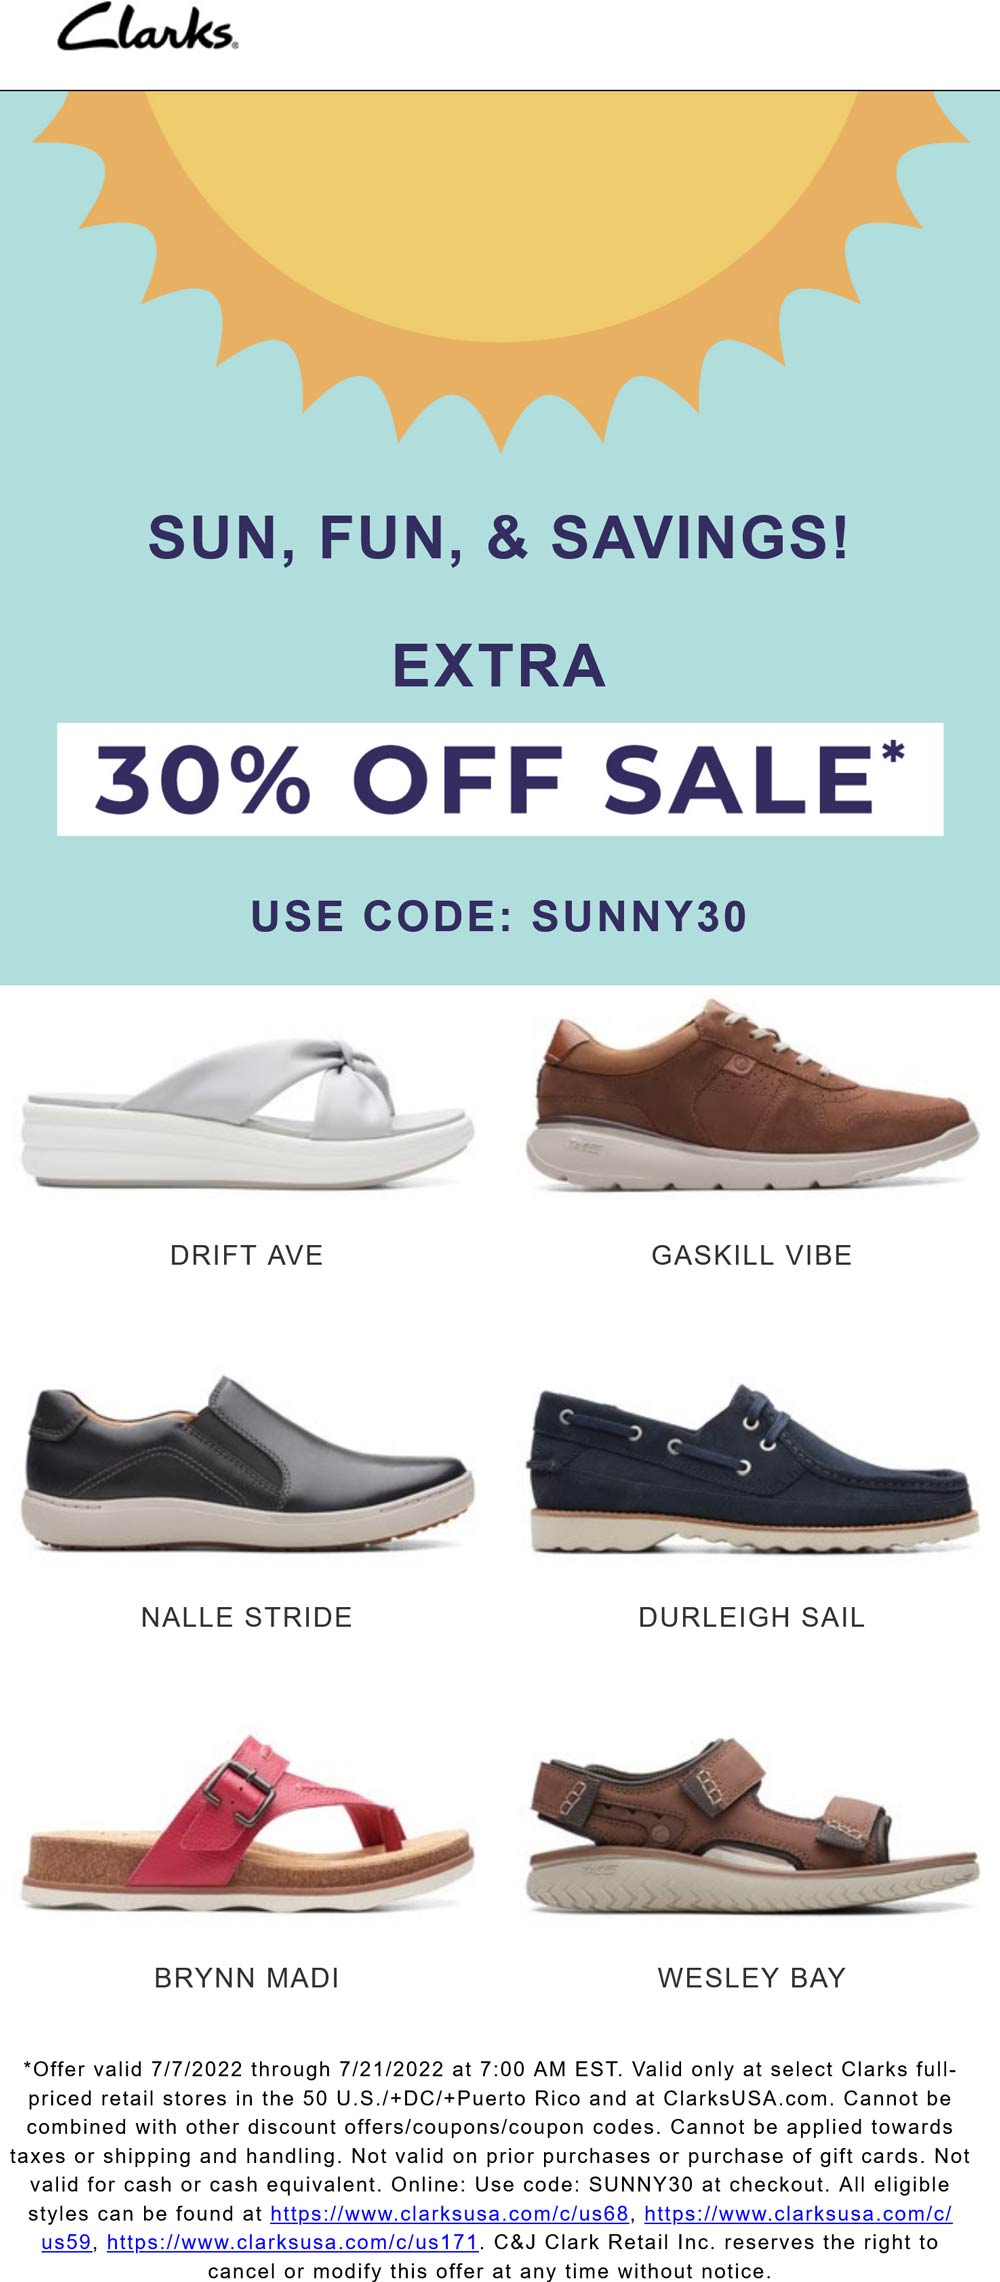 Clarks stores Coupon  Extra 30% off sale shoes at Clarks via promo code SUNNY30 #clarks 